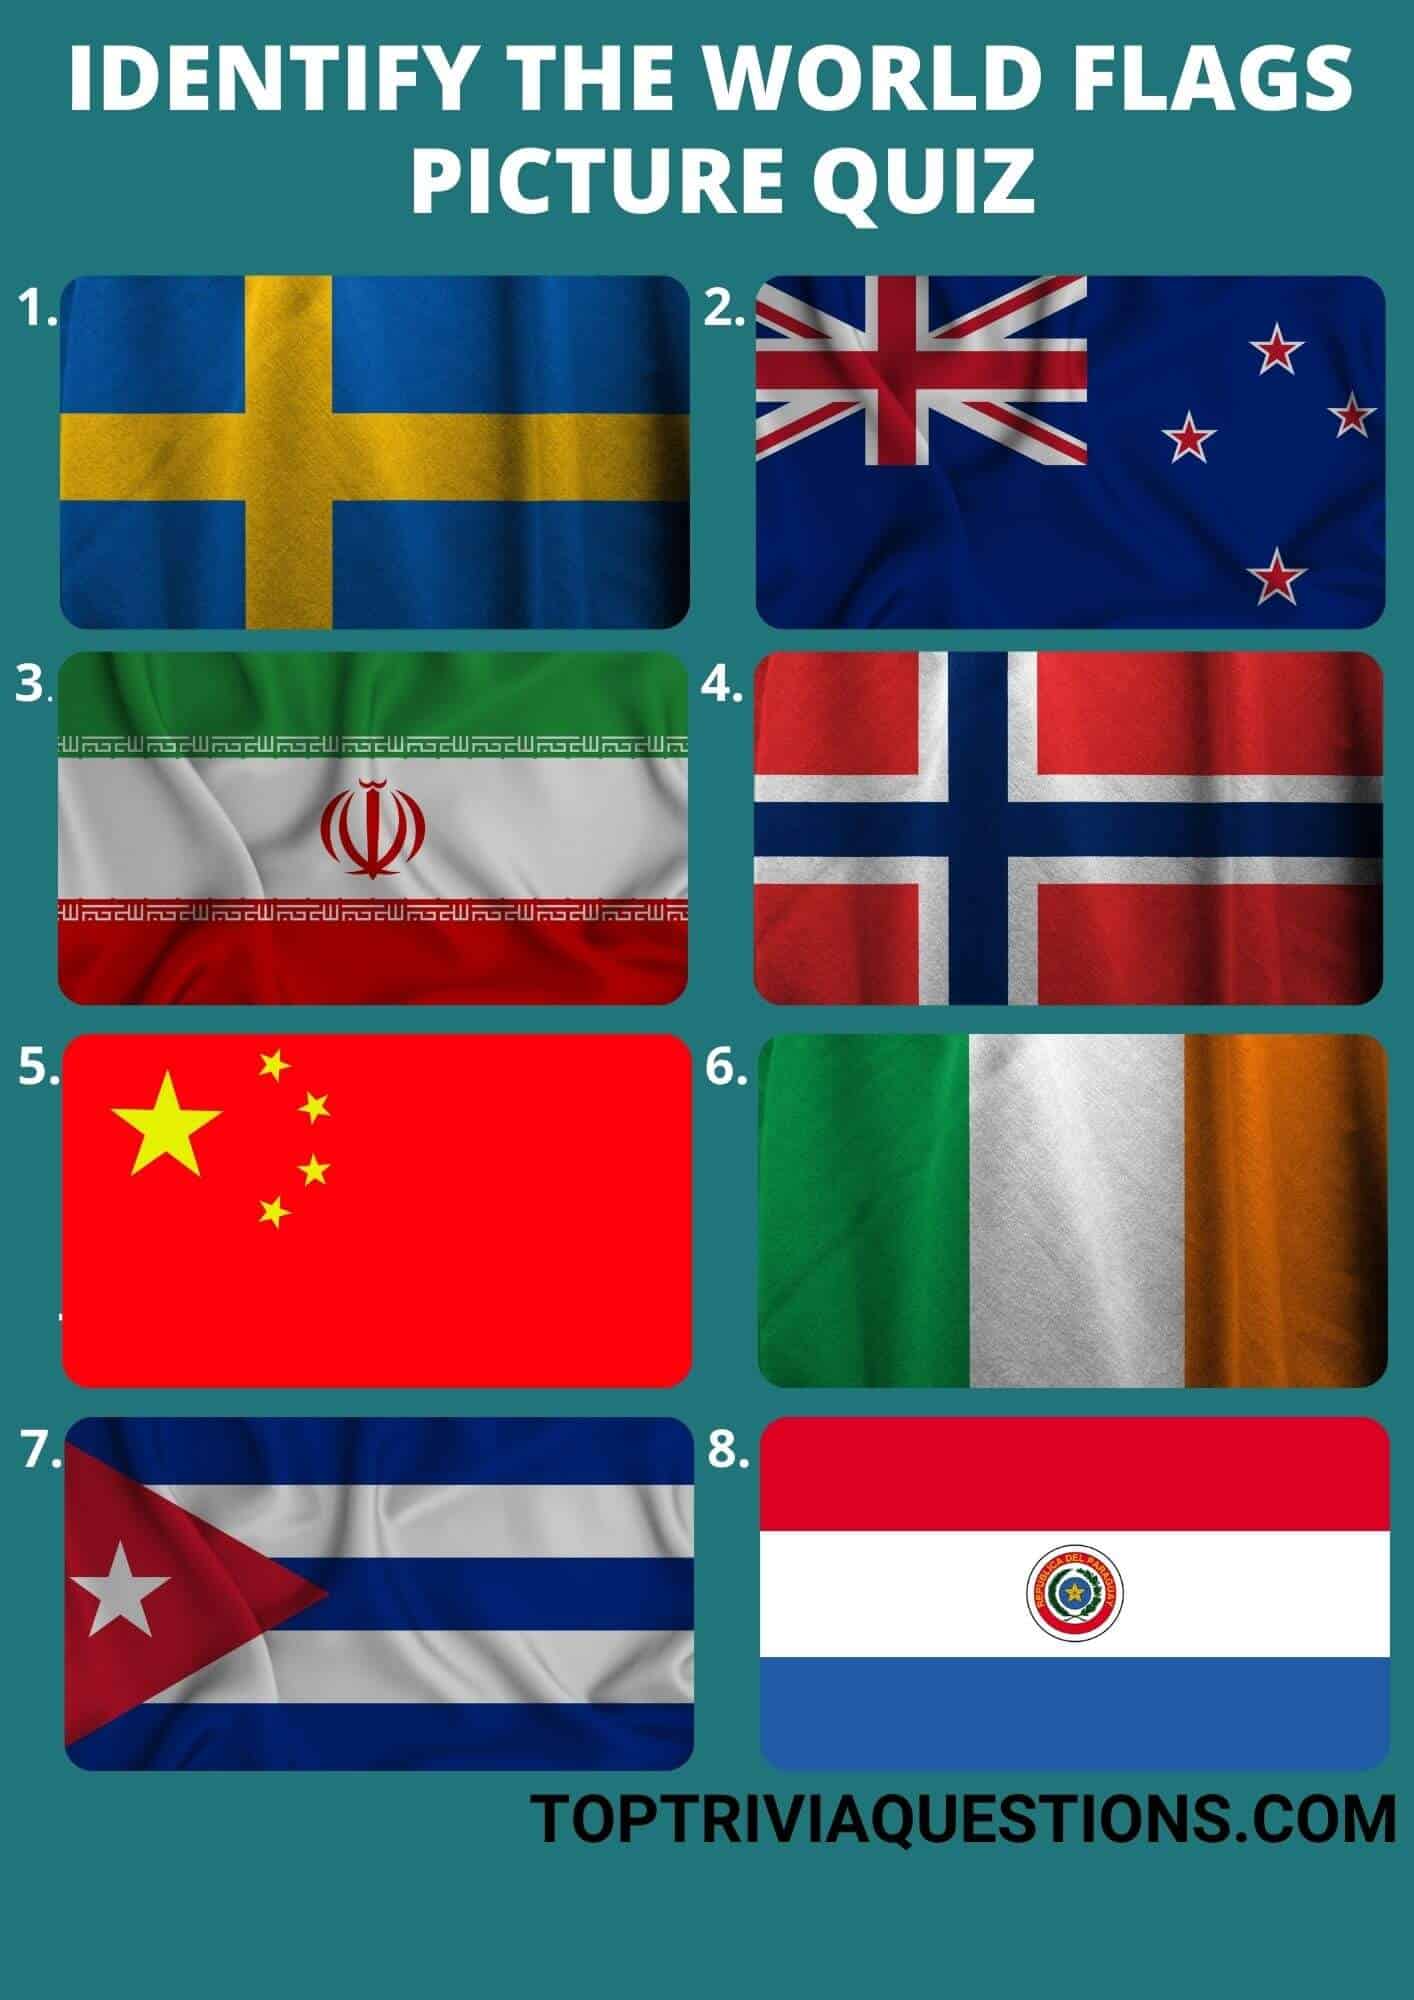 Identify the World Flags Picture Quiz